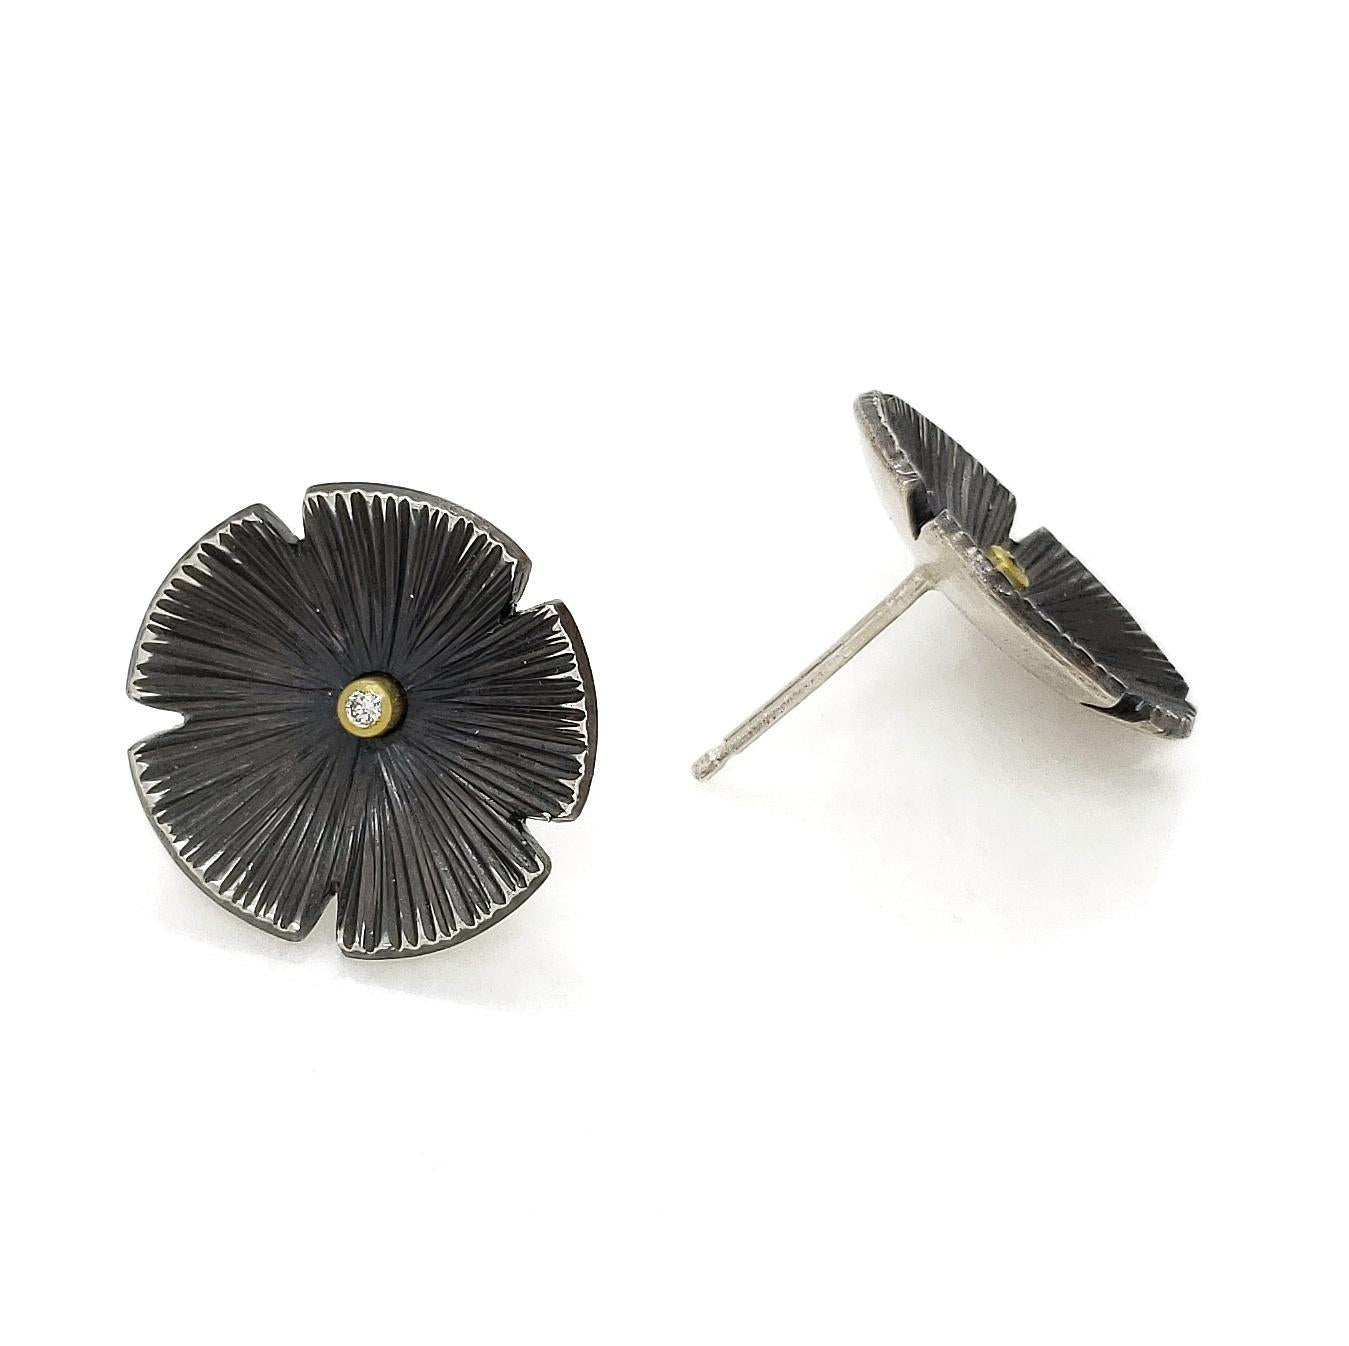 Earrings – Lily Pad Posts in Black by Susan Mahlstedt